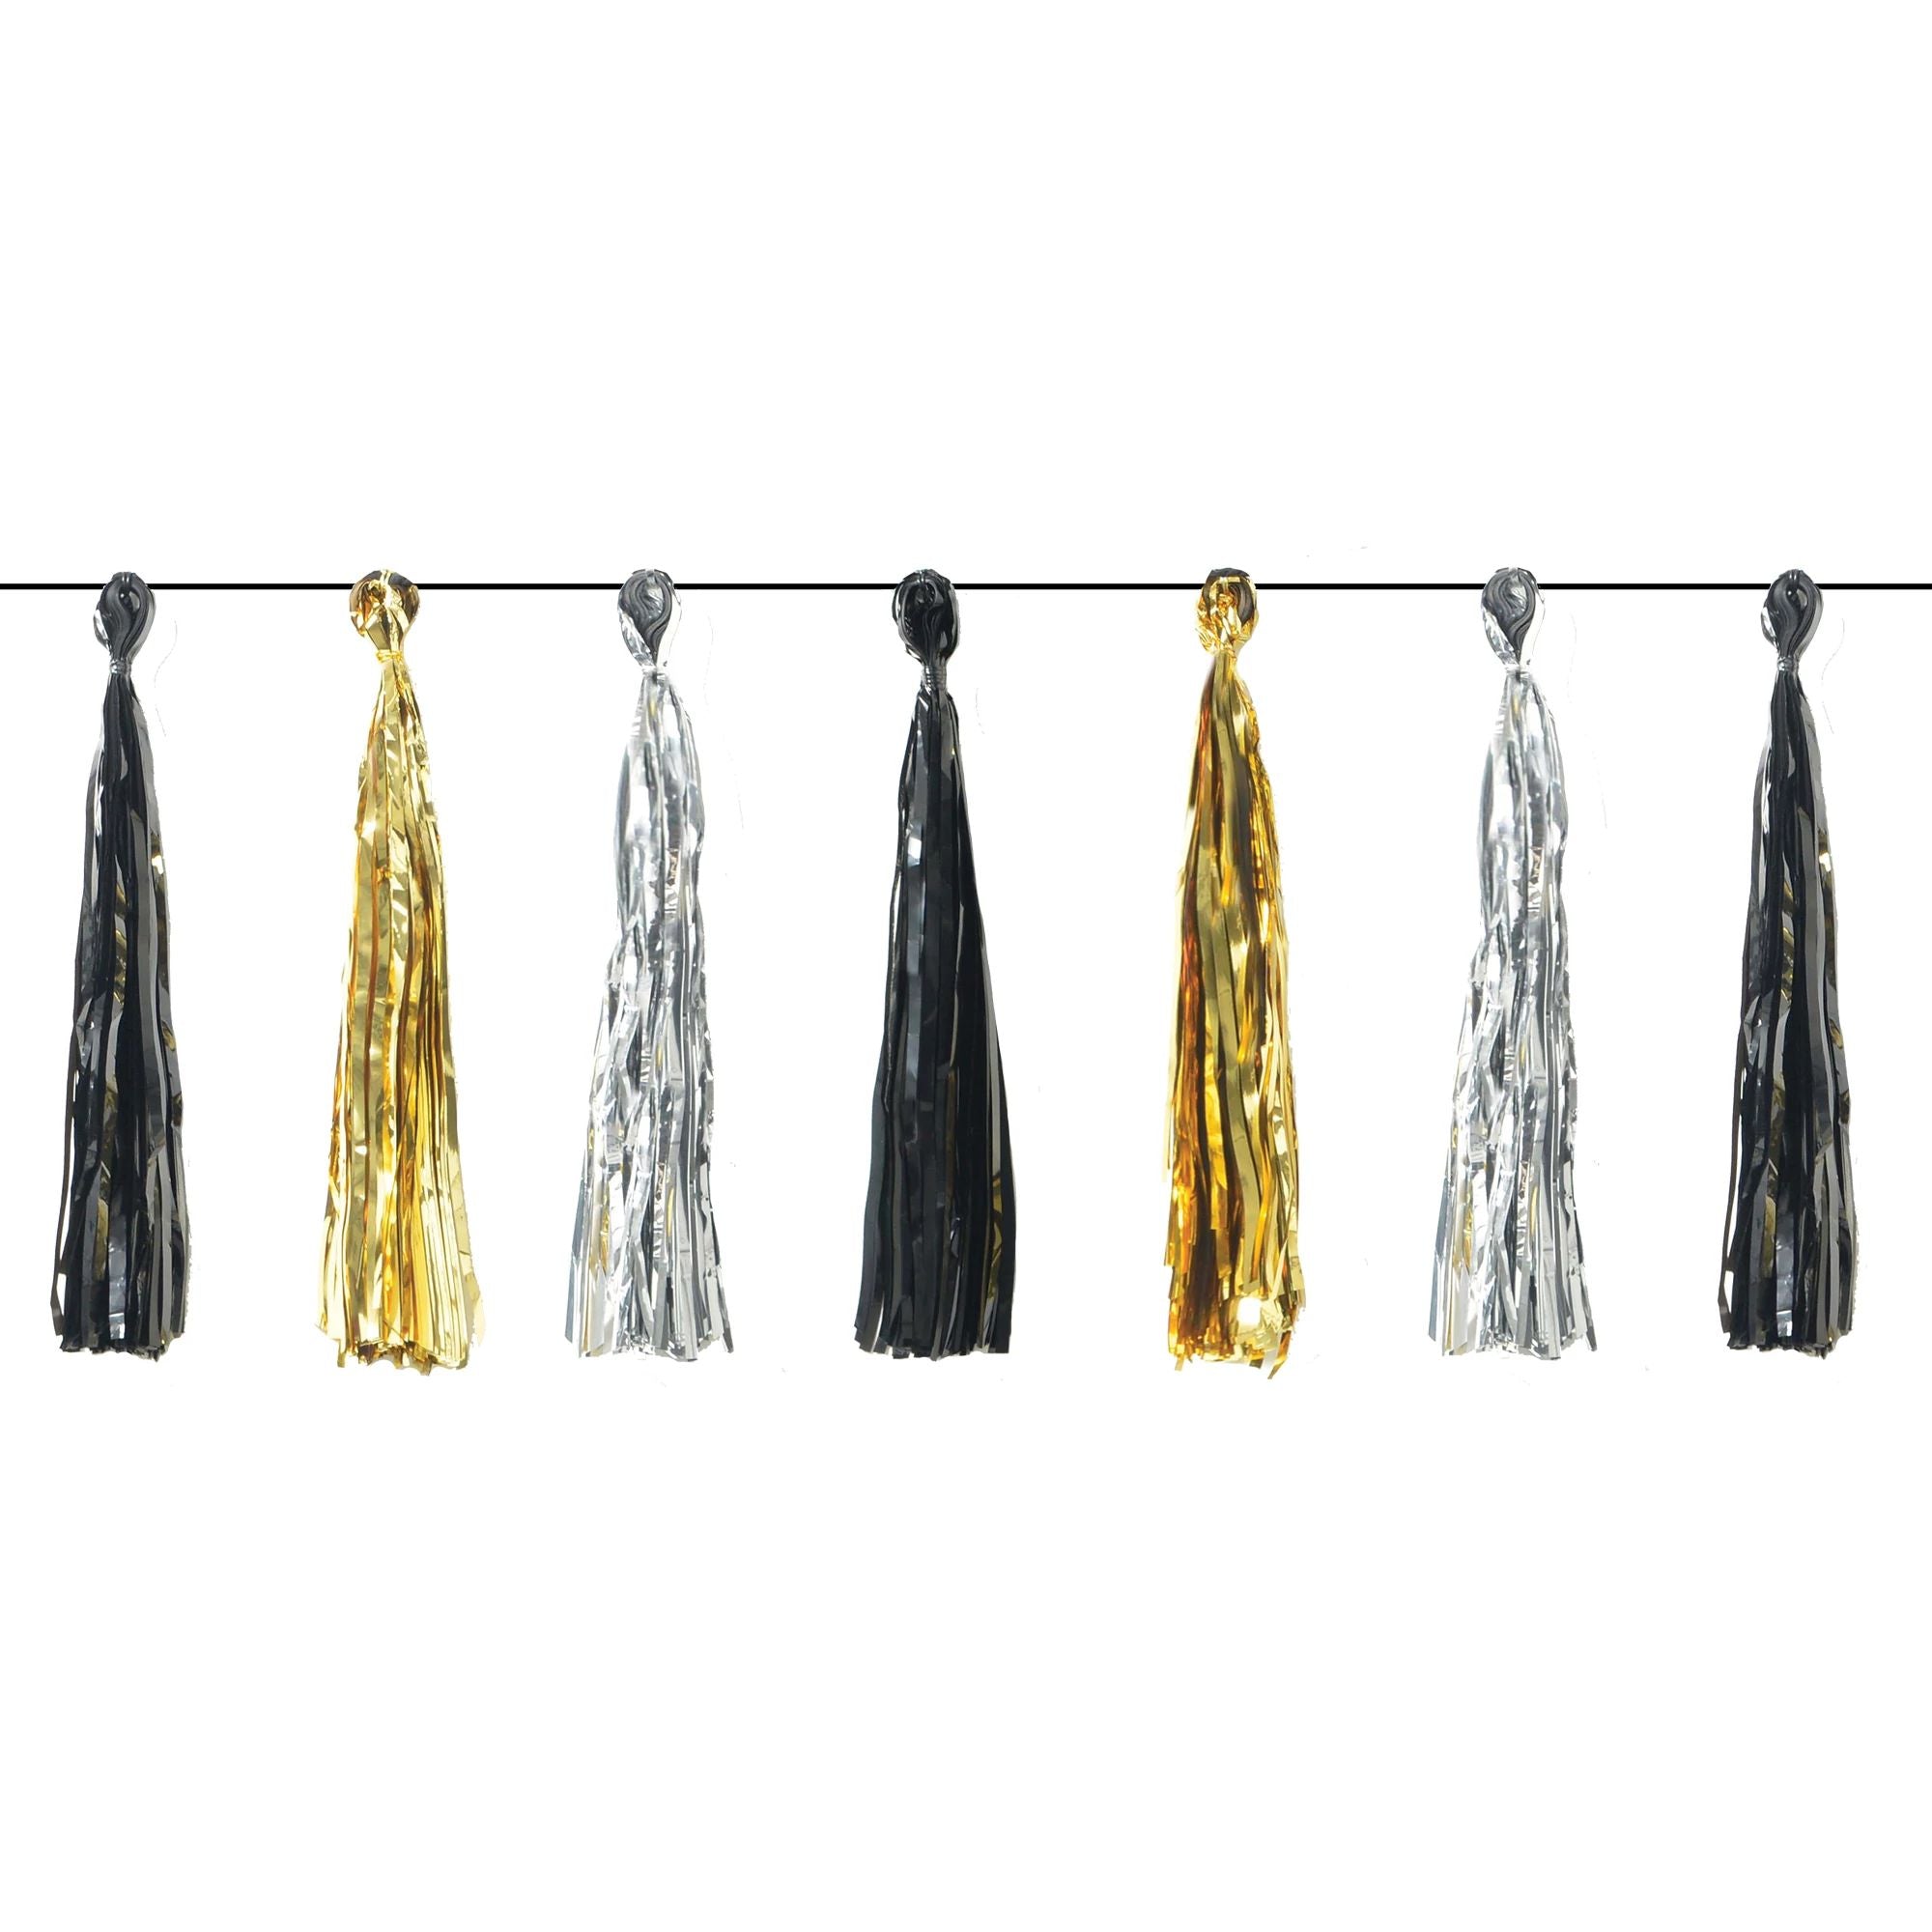 Amscan HOLIDAY: NEW YEAR'S New Year's Foil Tassel Garland - Black, Silver, Gold